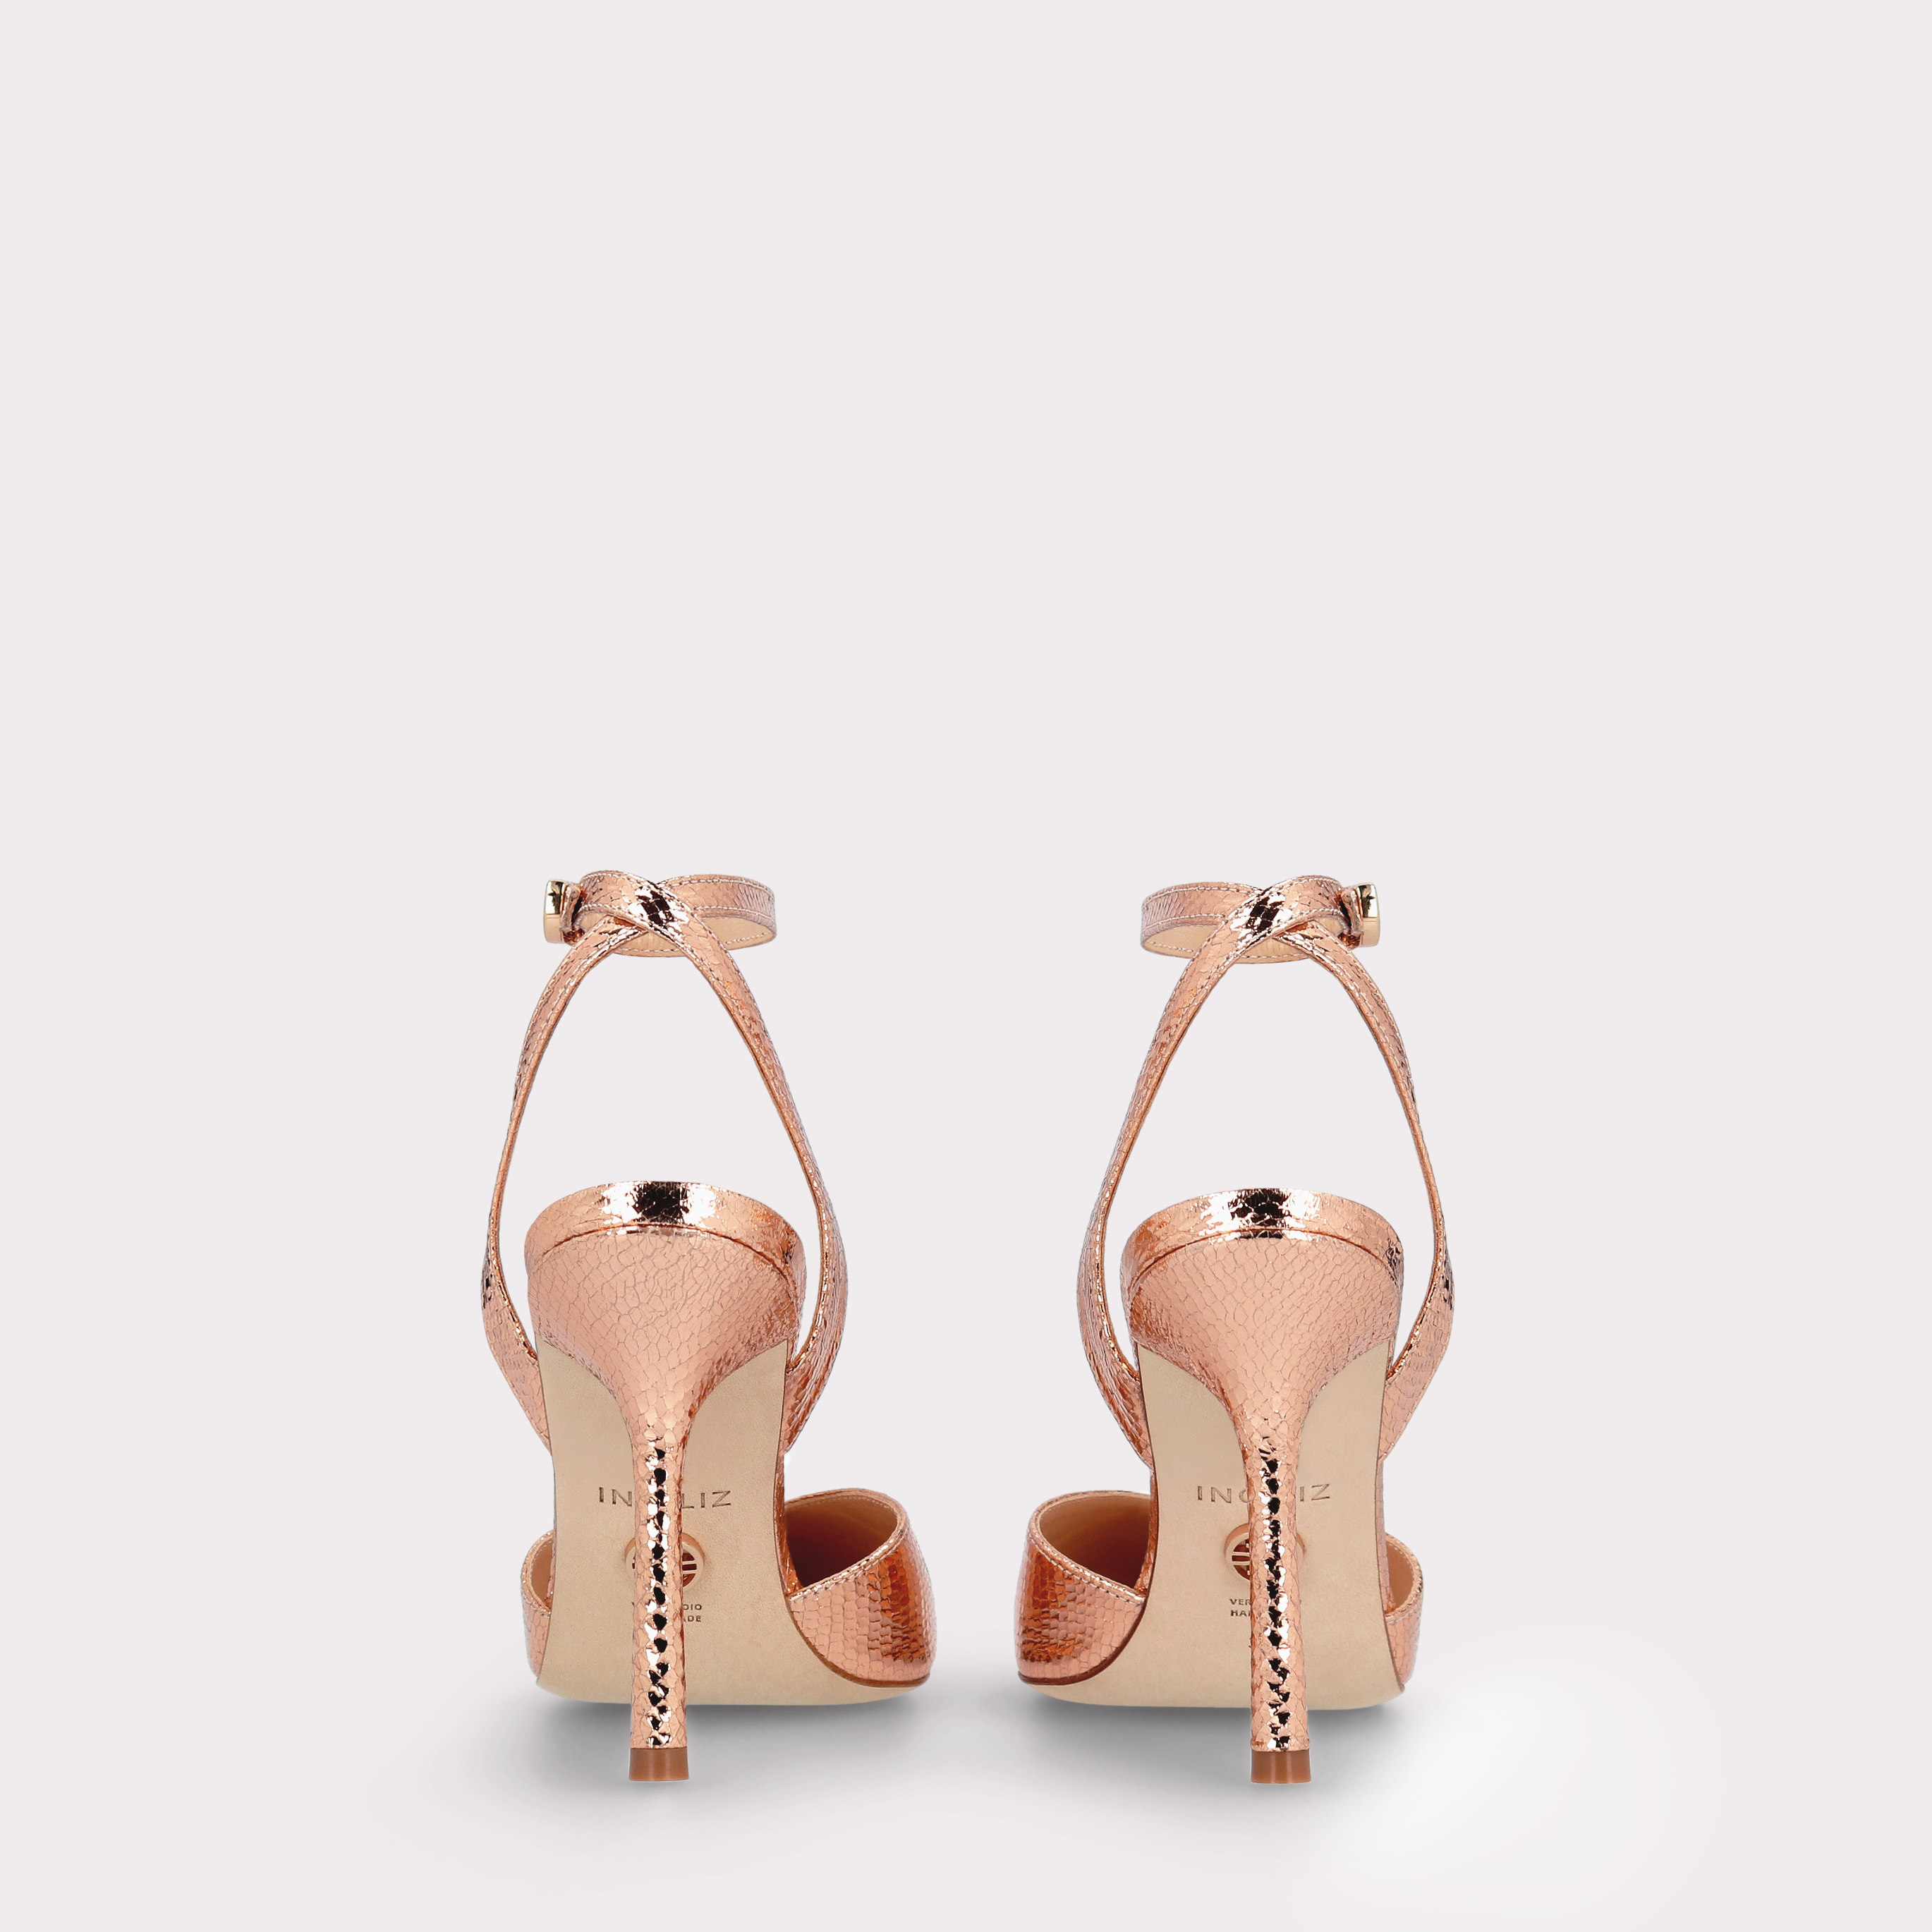 ABA 13 ROSE GOLD LEATHER PUMPS